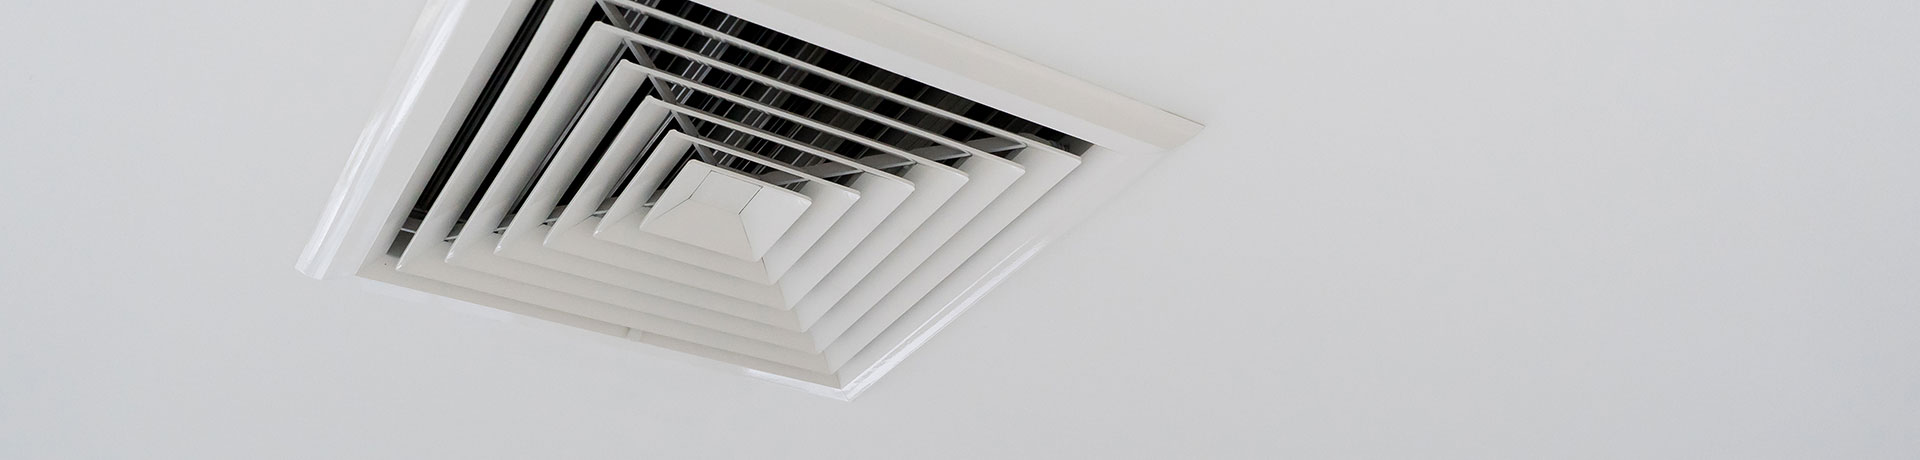 A ceiling air vent shot from above